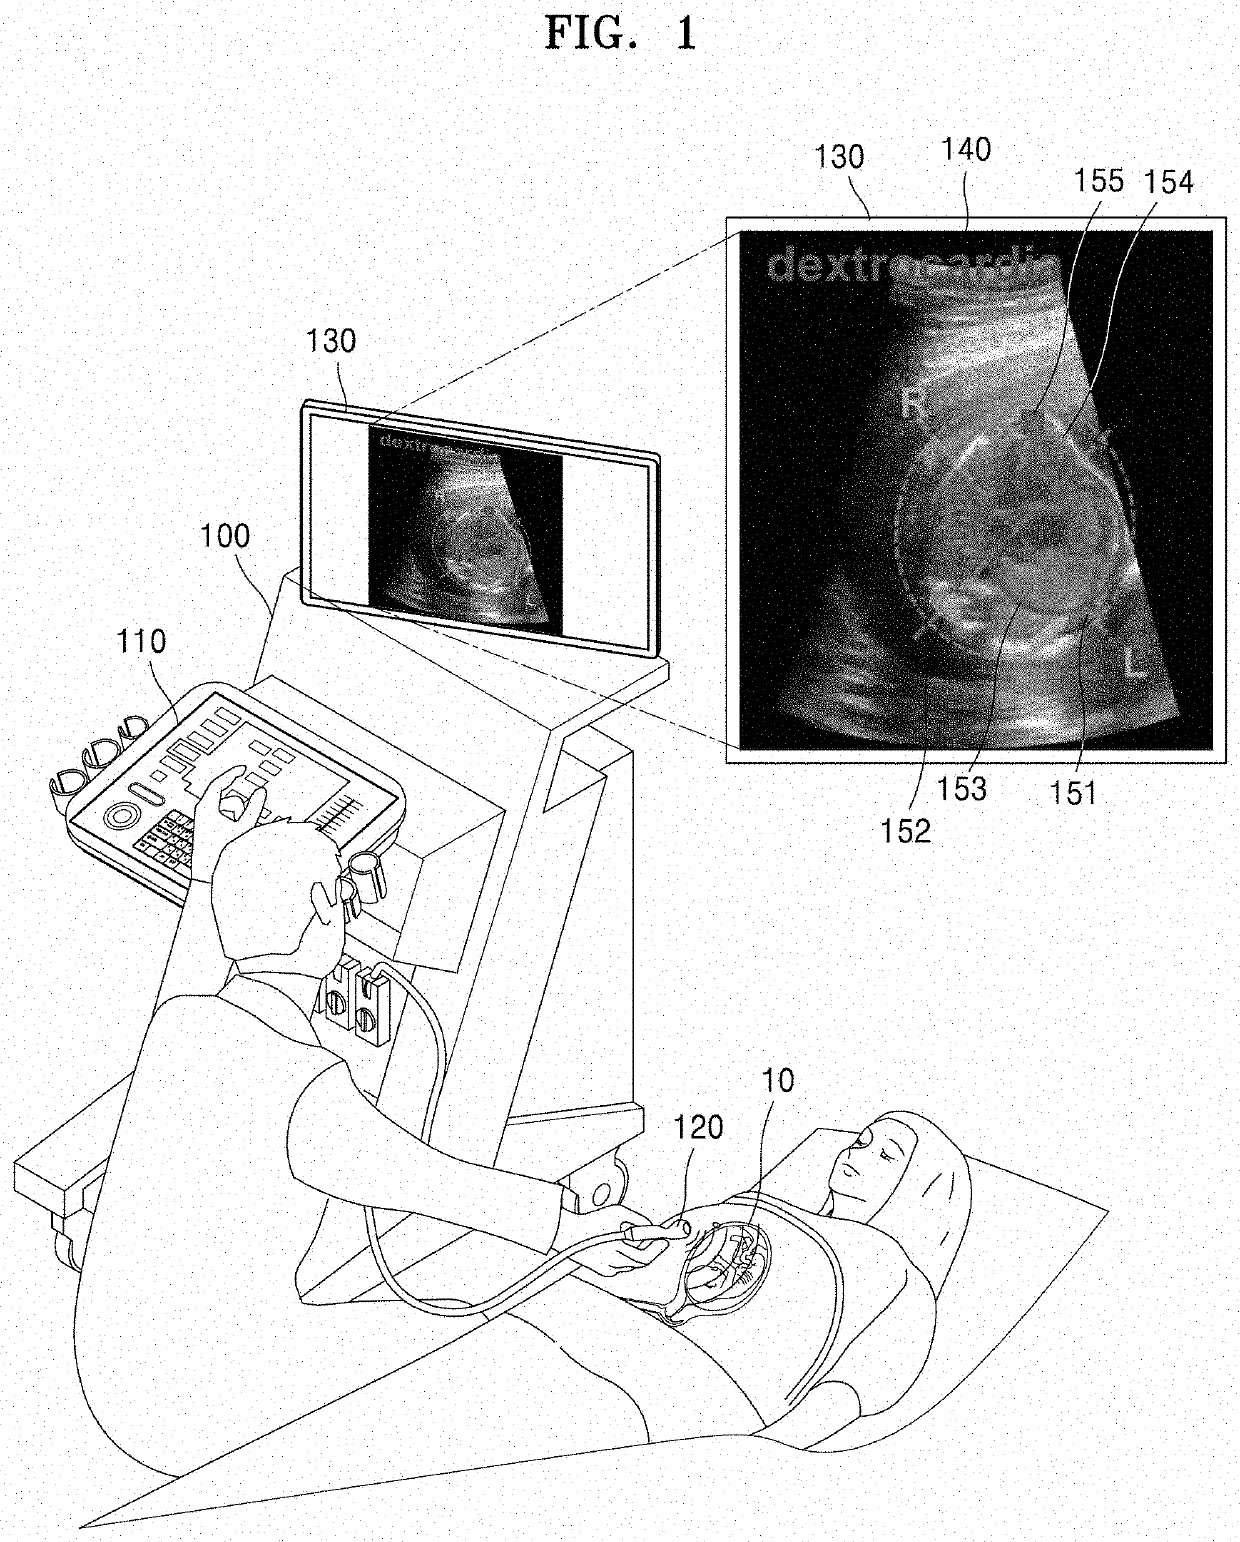 Ultrasound diagnosis apparatus for determining abnormality of fetal heart, and operating method thereof